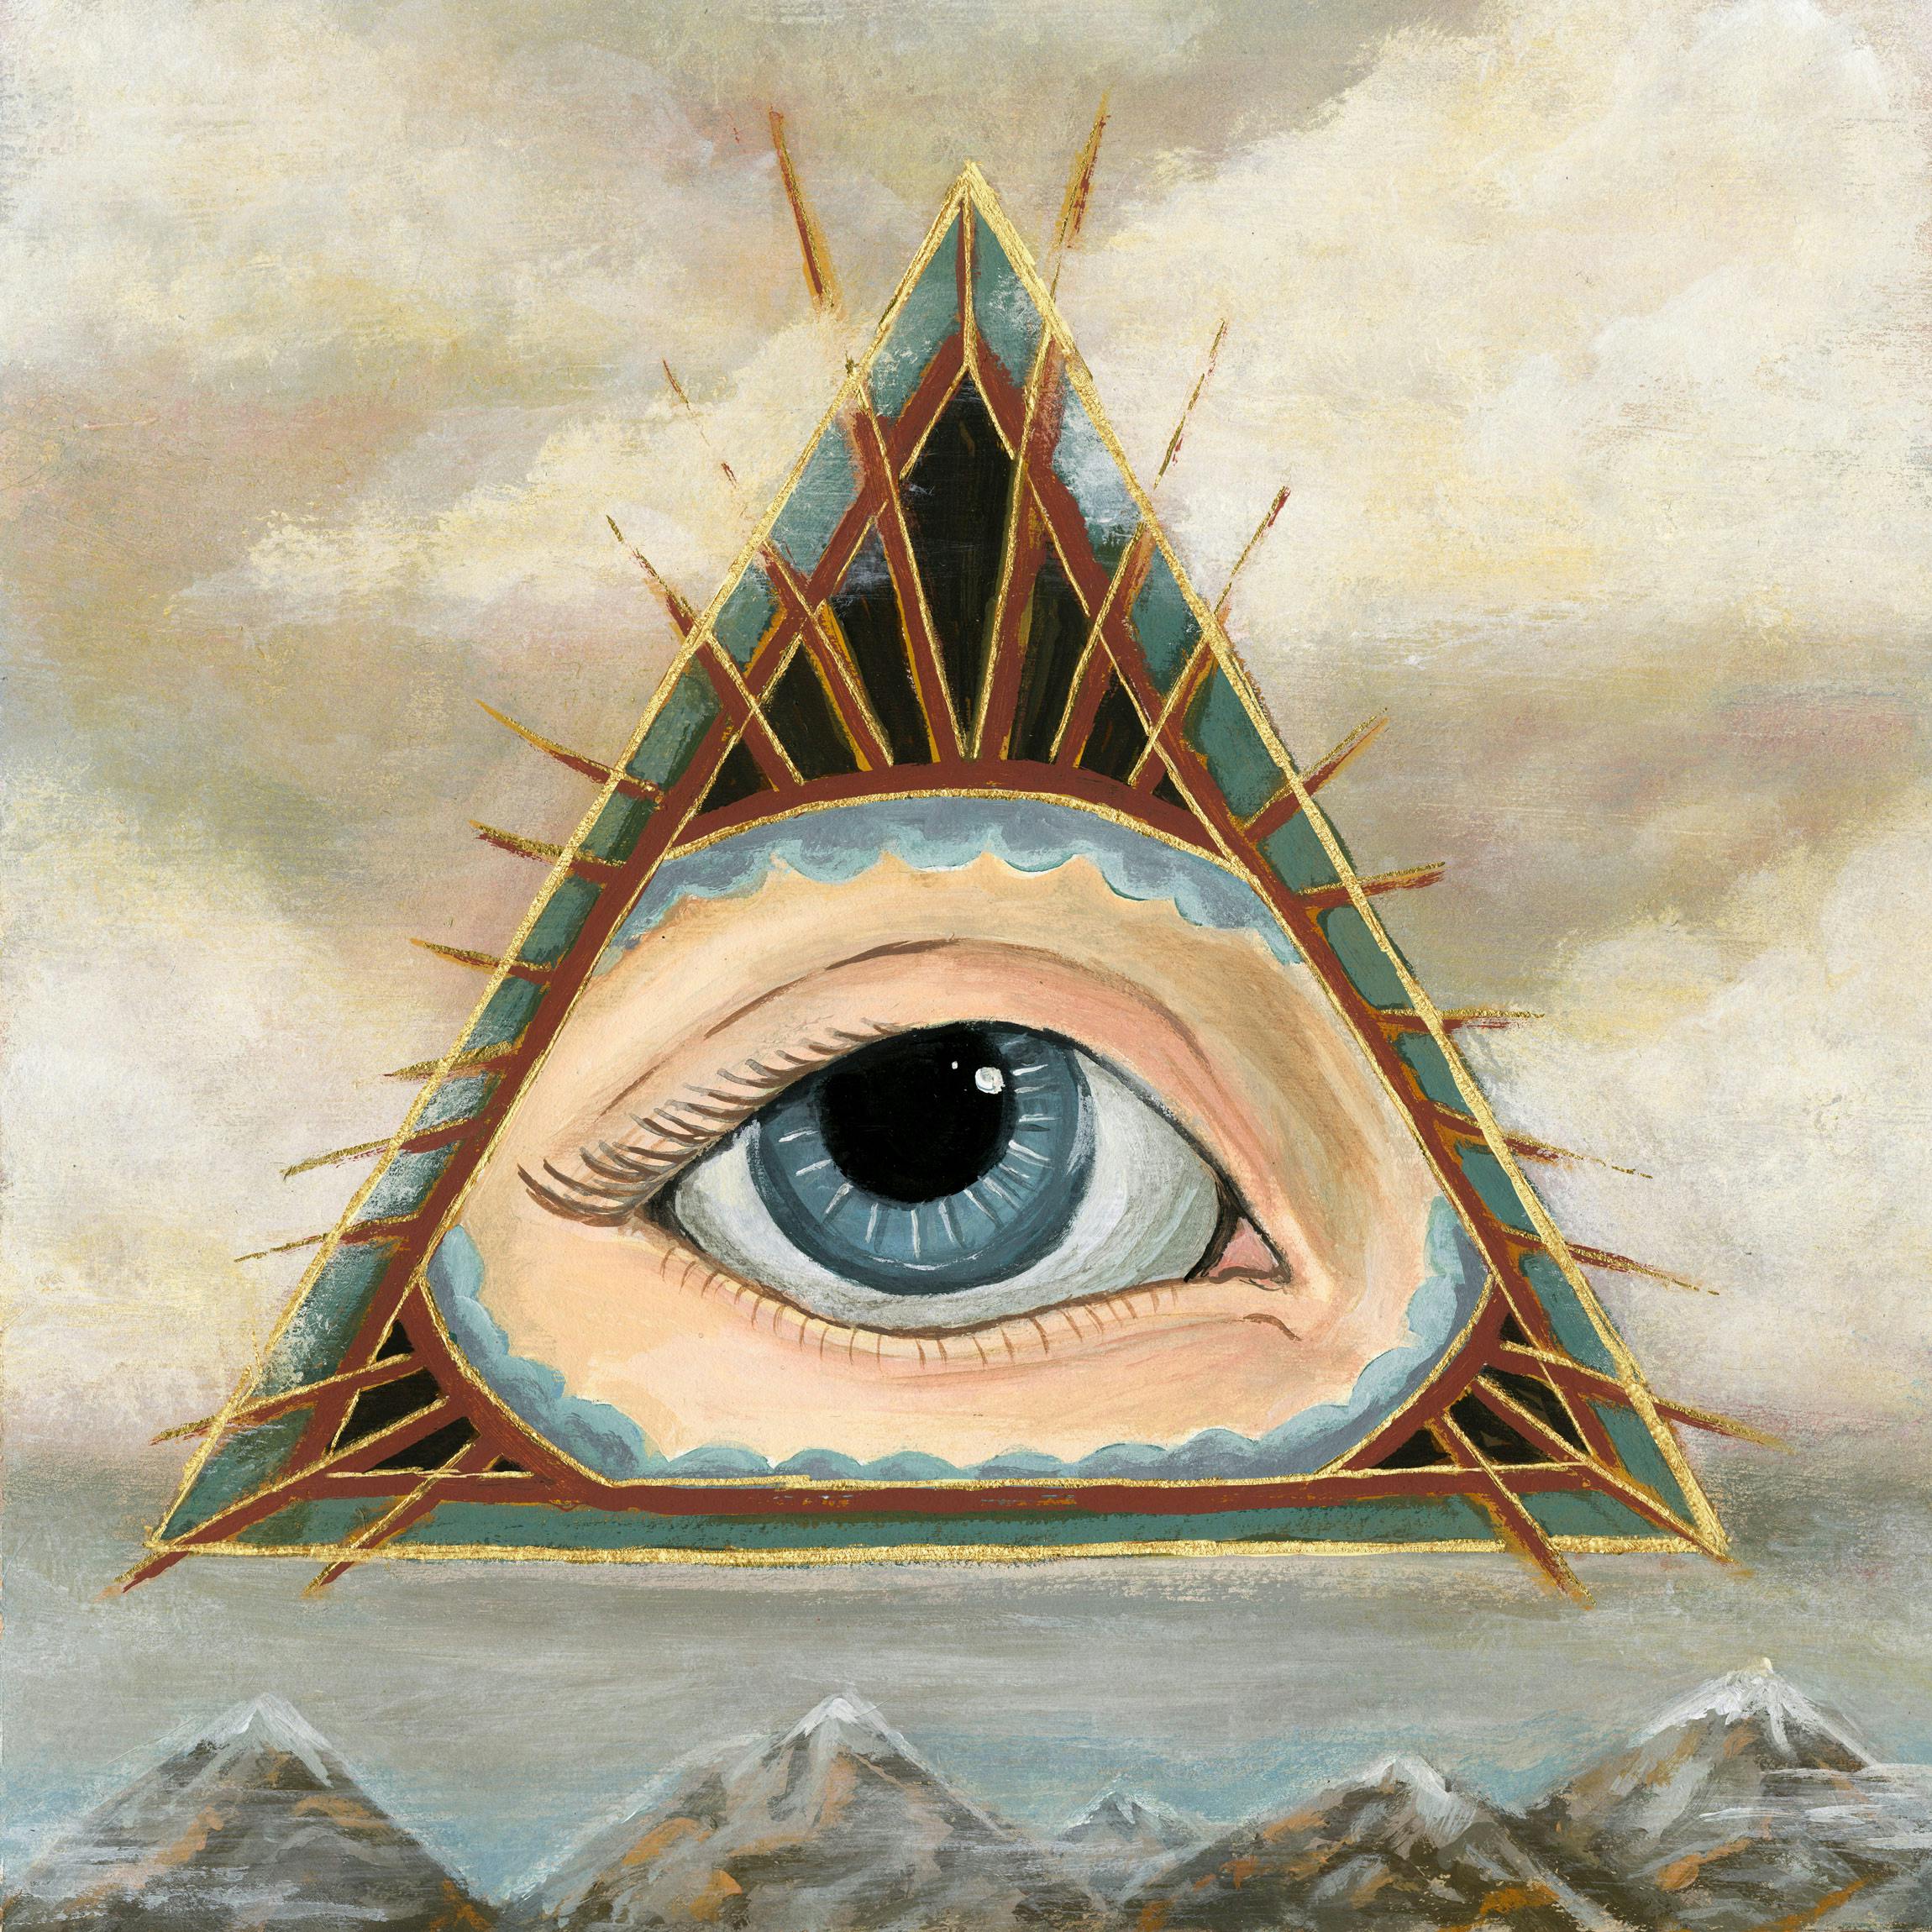 Illustration of triangle with eye in it